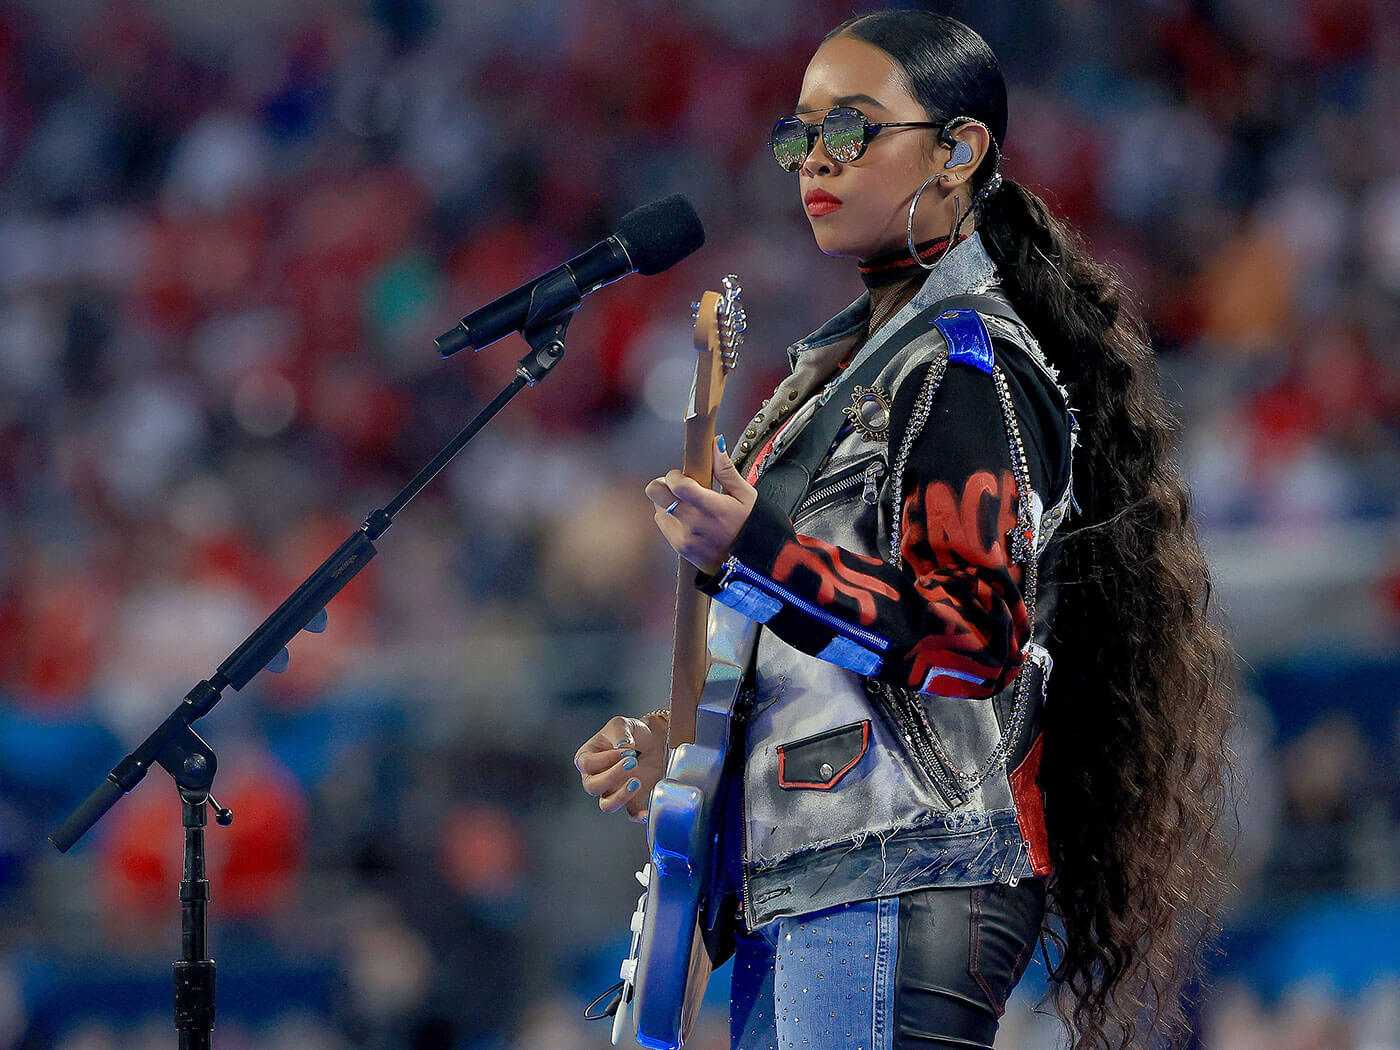 H.E.R. performing at the Super Bowl LV